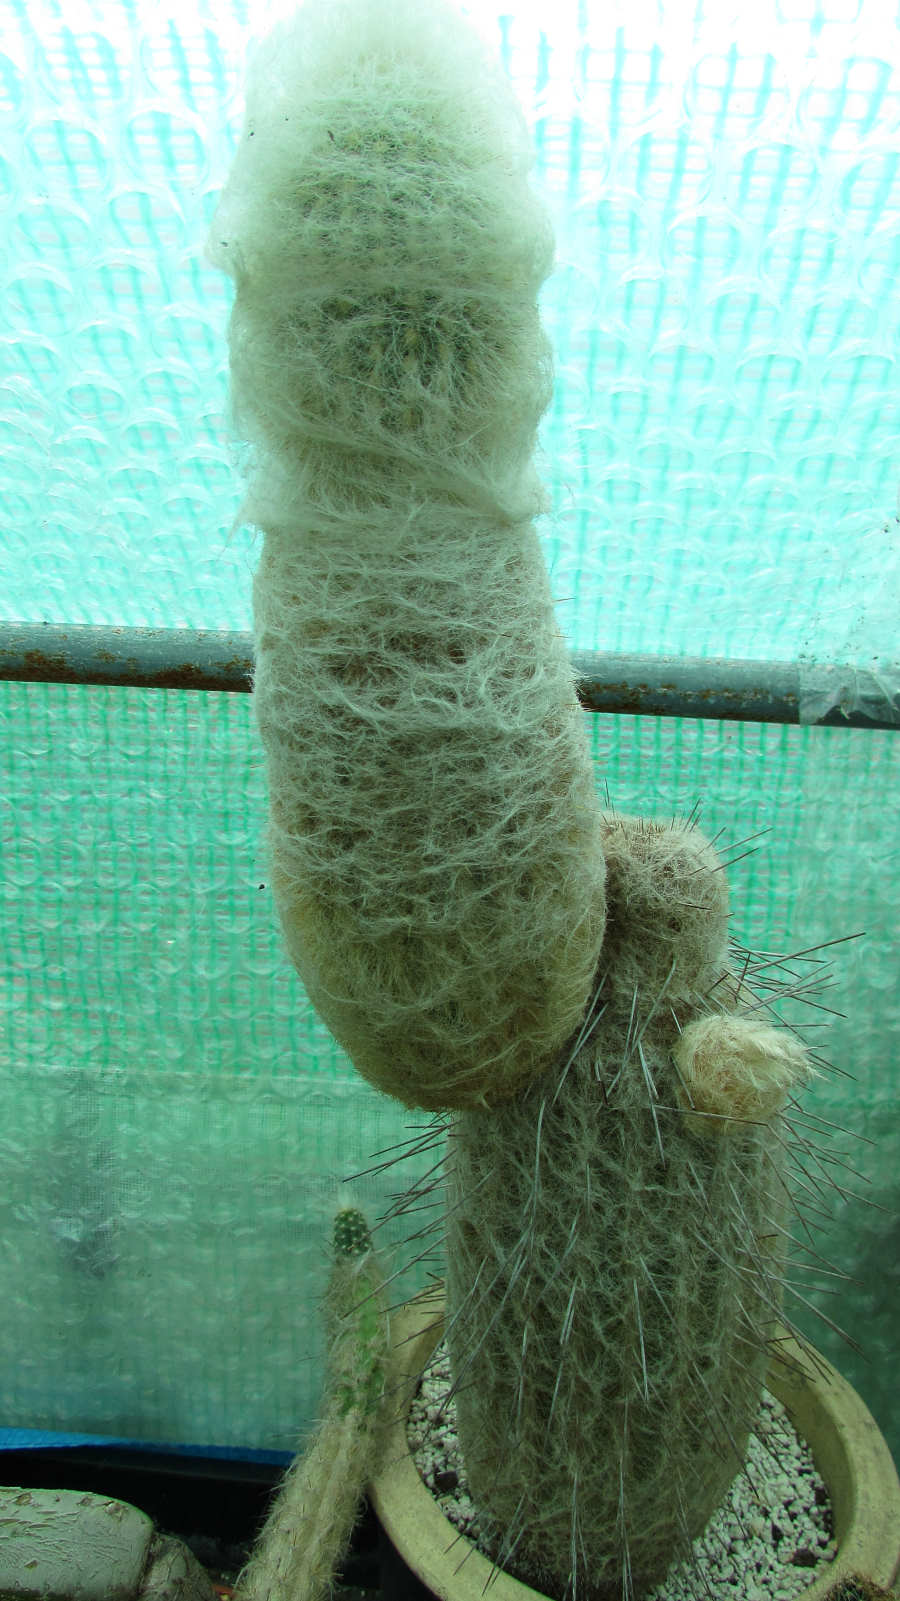 Espostoa with lots of woven woolly hair